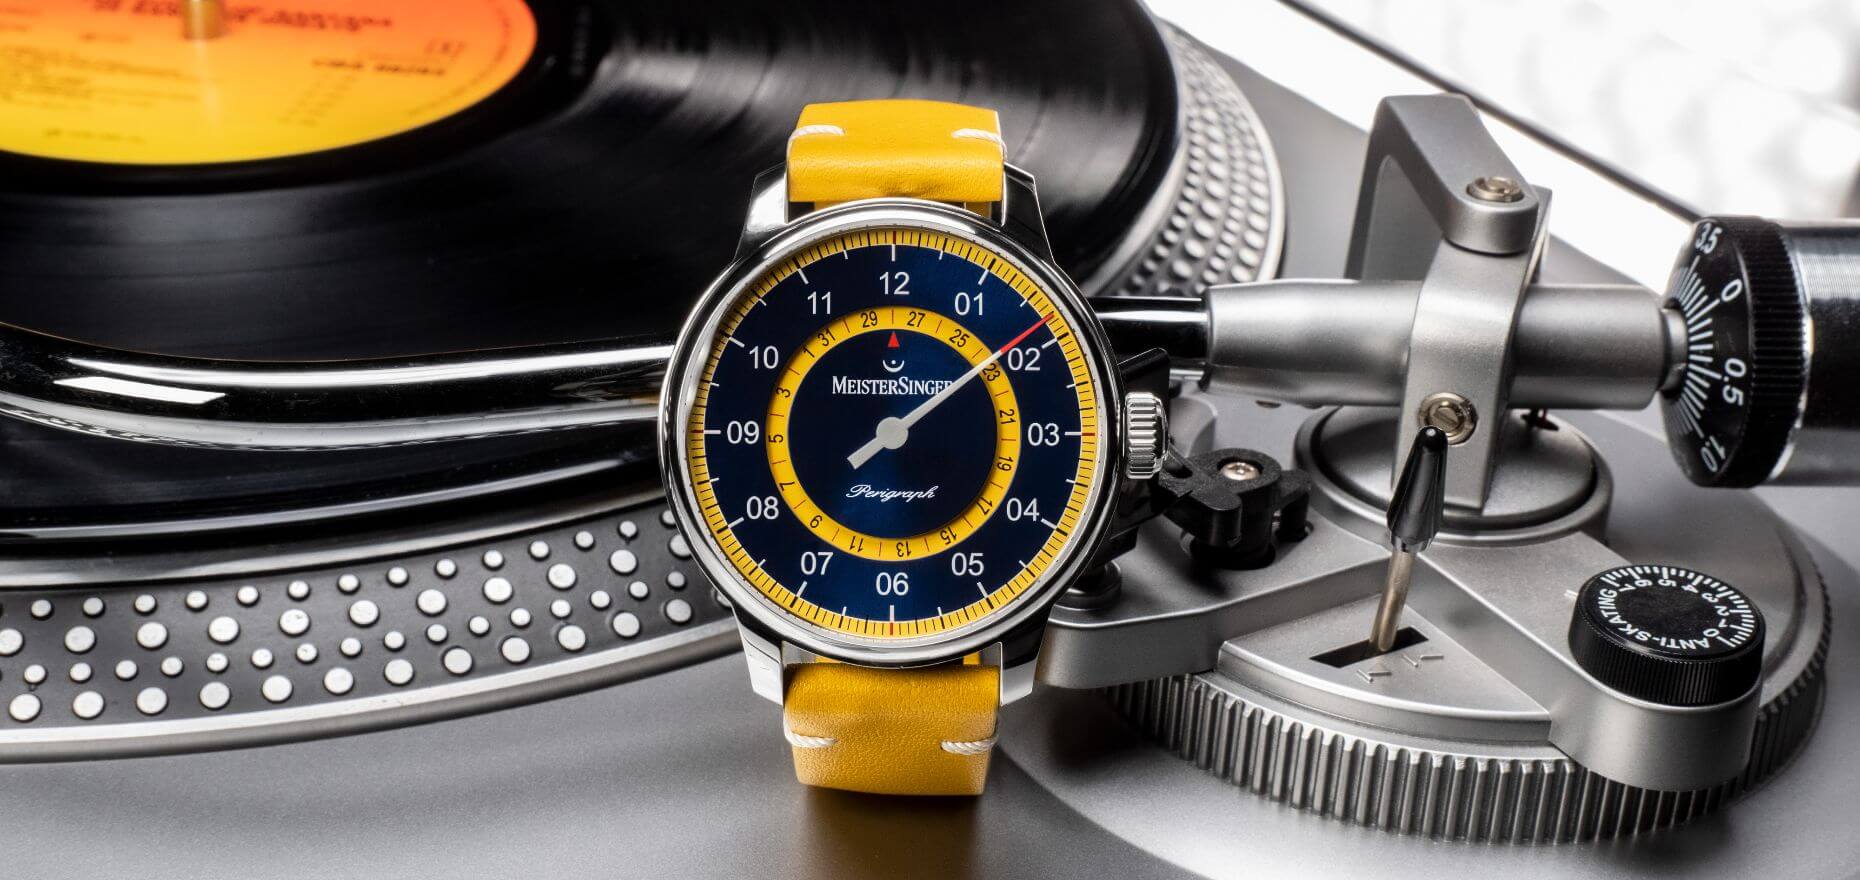 MeisterSinger Classic 2.0: The new Perigraph Mellow Yellow